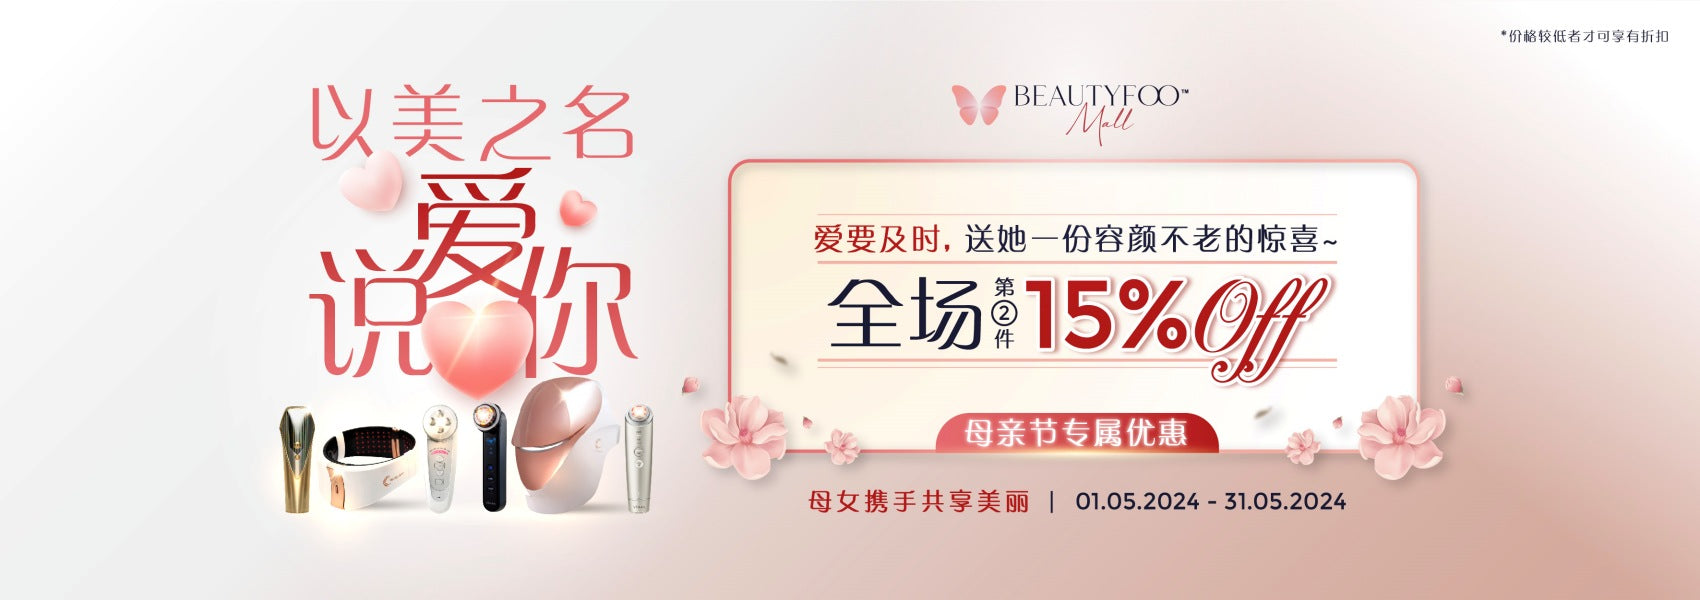 BeautyFoo Mall Mother’s Day Sale 2024 Promo – Mother’s Day Sale of Year 2024 | BeautyFoo Mall Malaysia